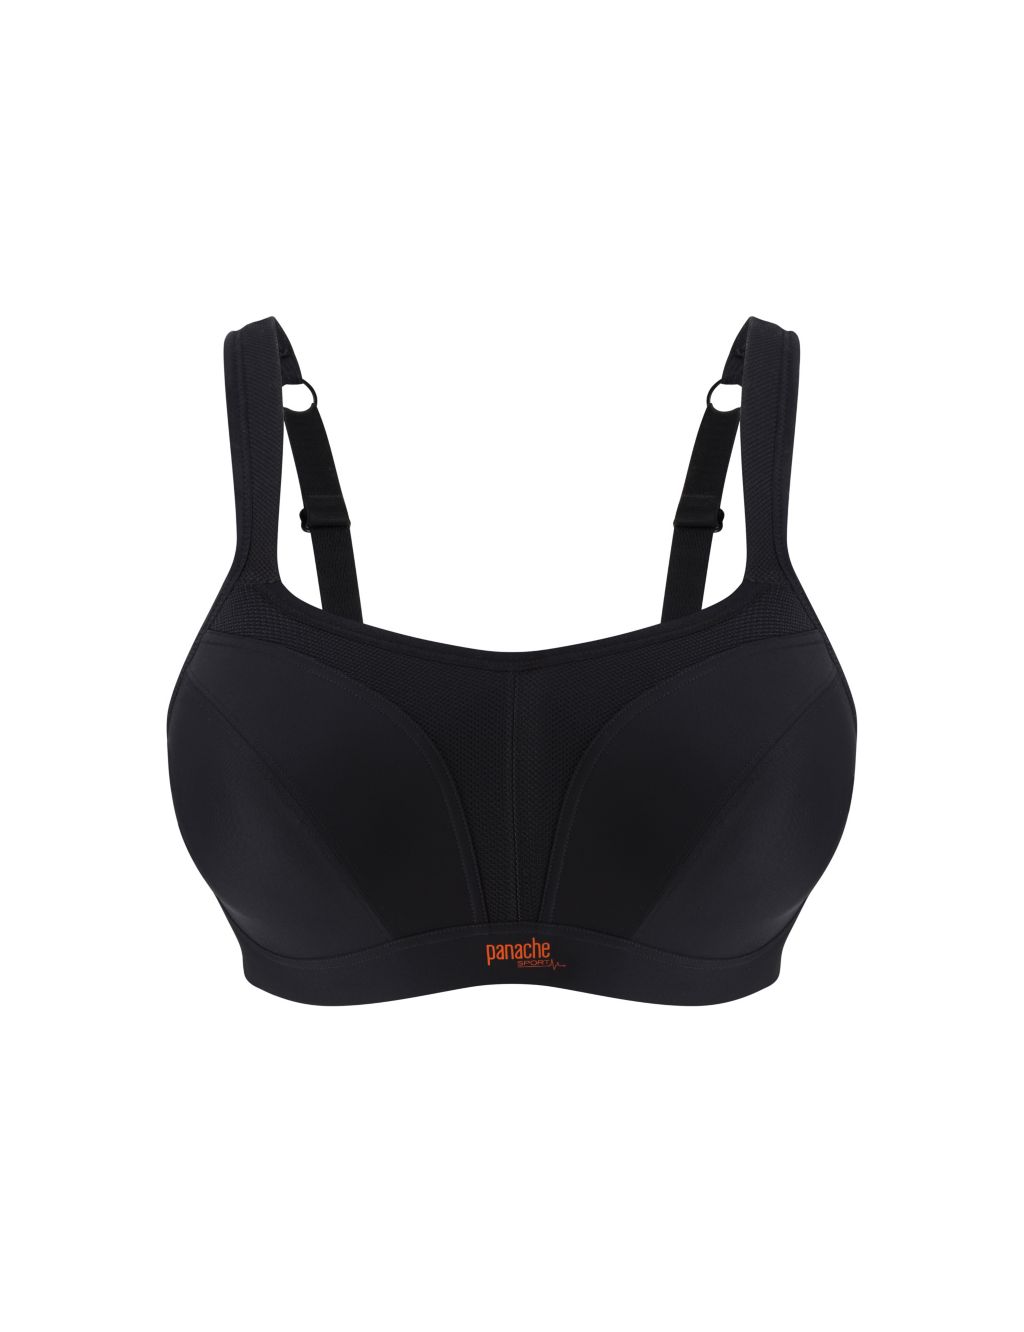 Ultimate Support Wired Sports Bra D-J image 2